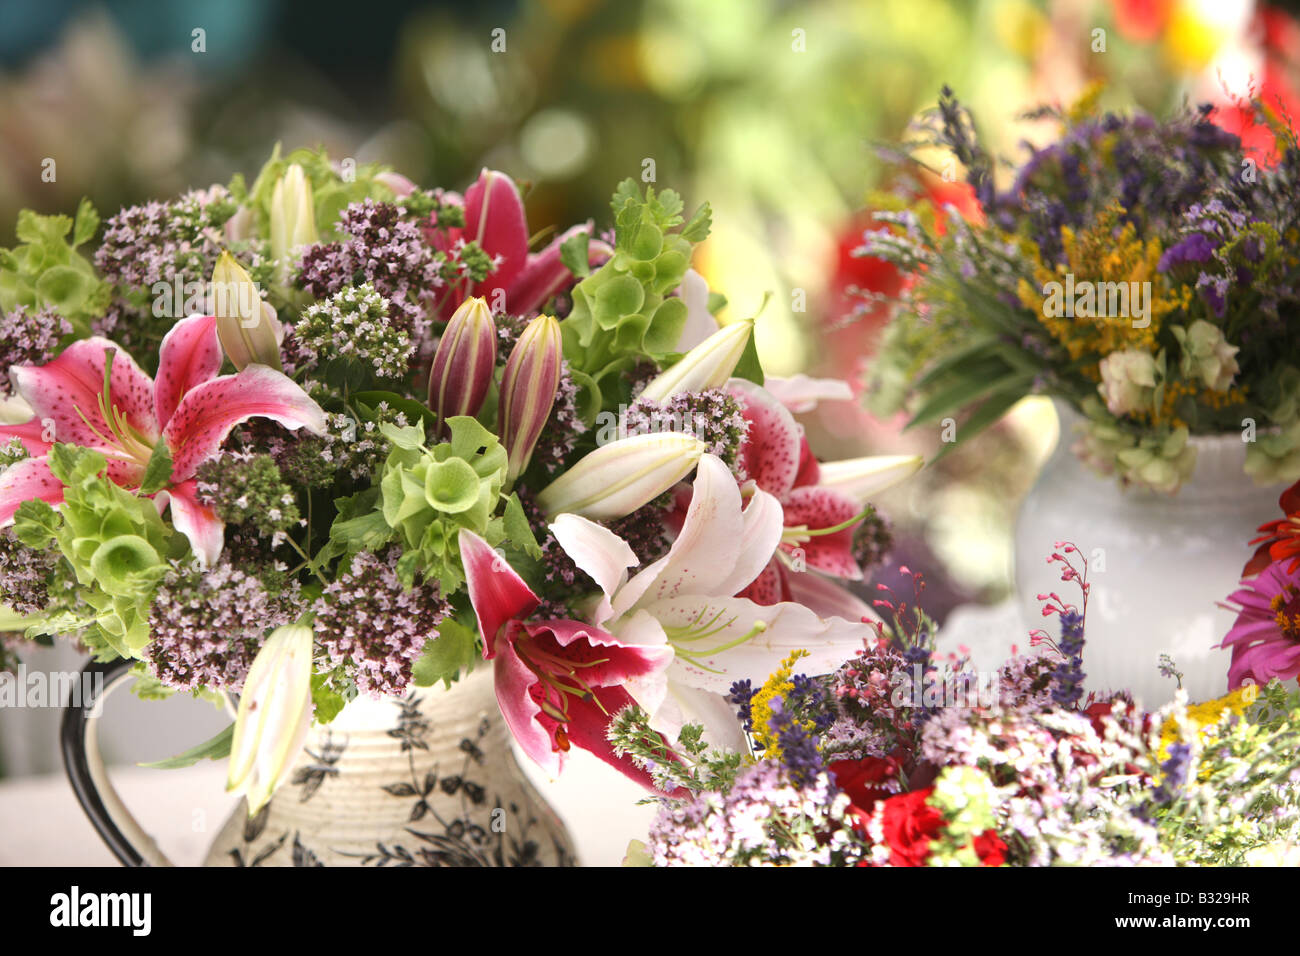 Bouquets of flowers on display at a market Stock Photo